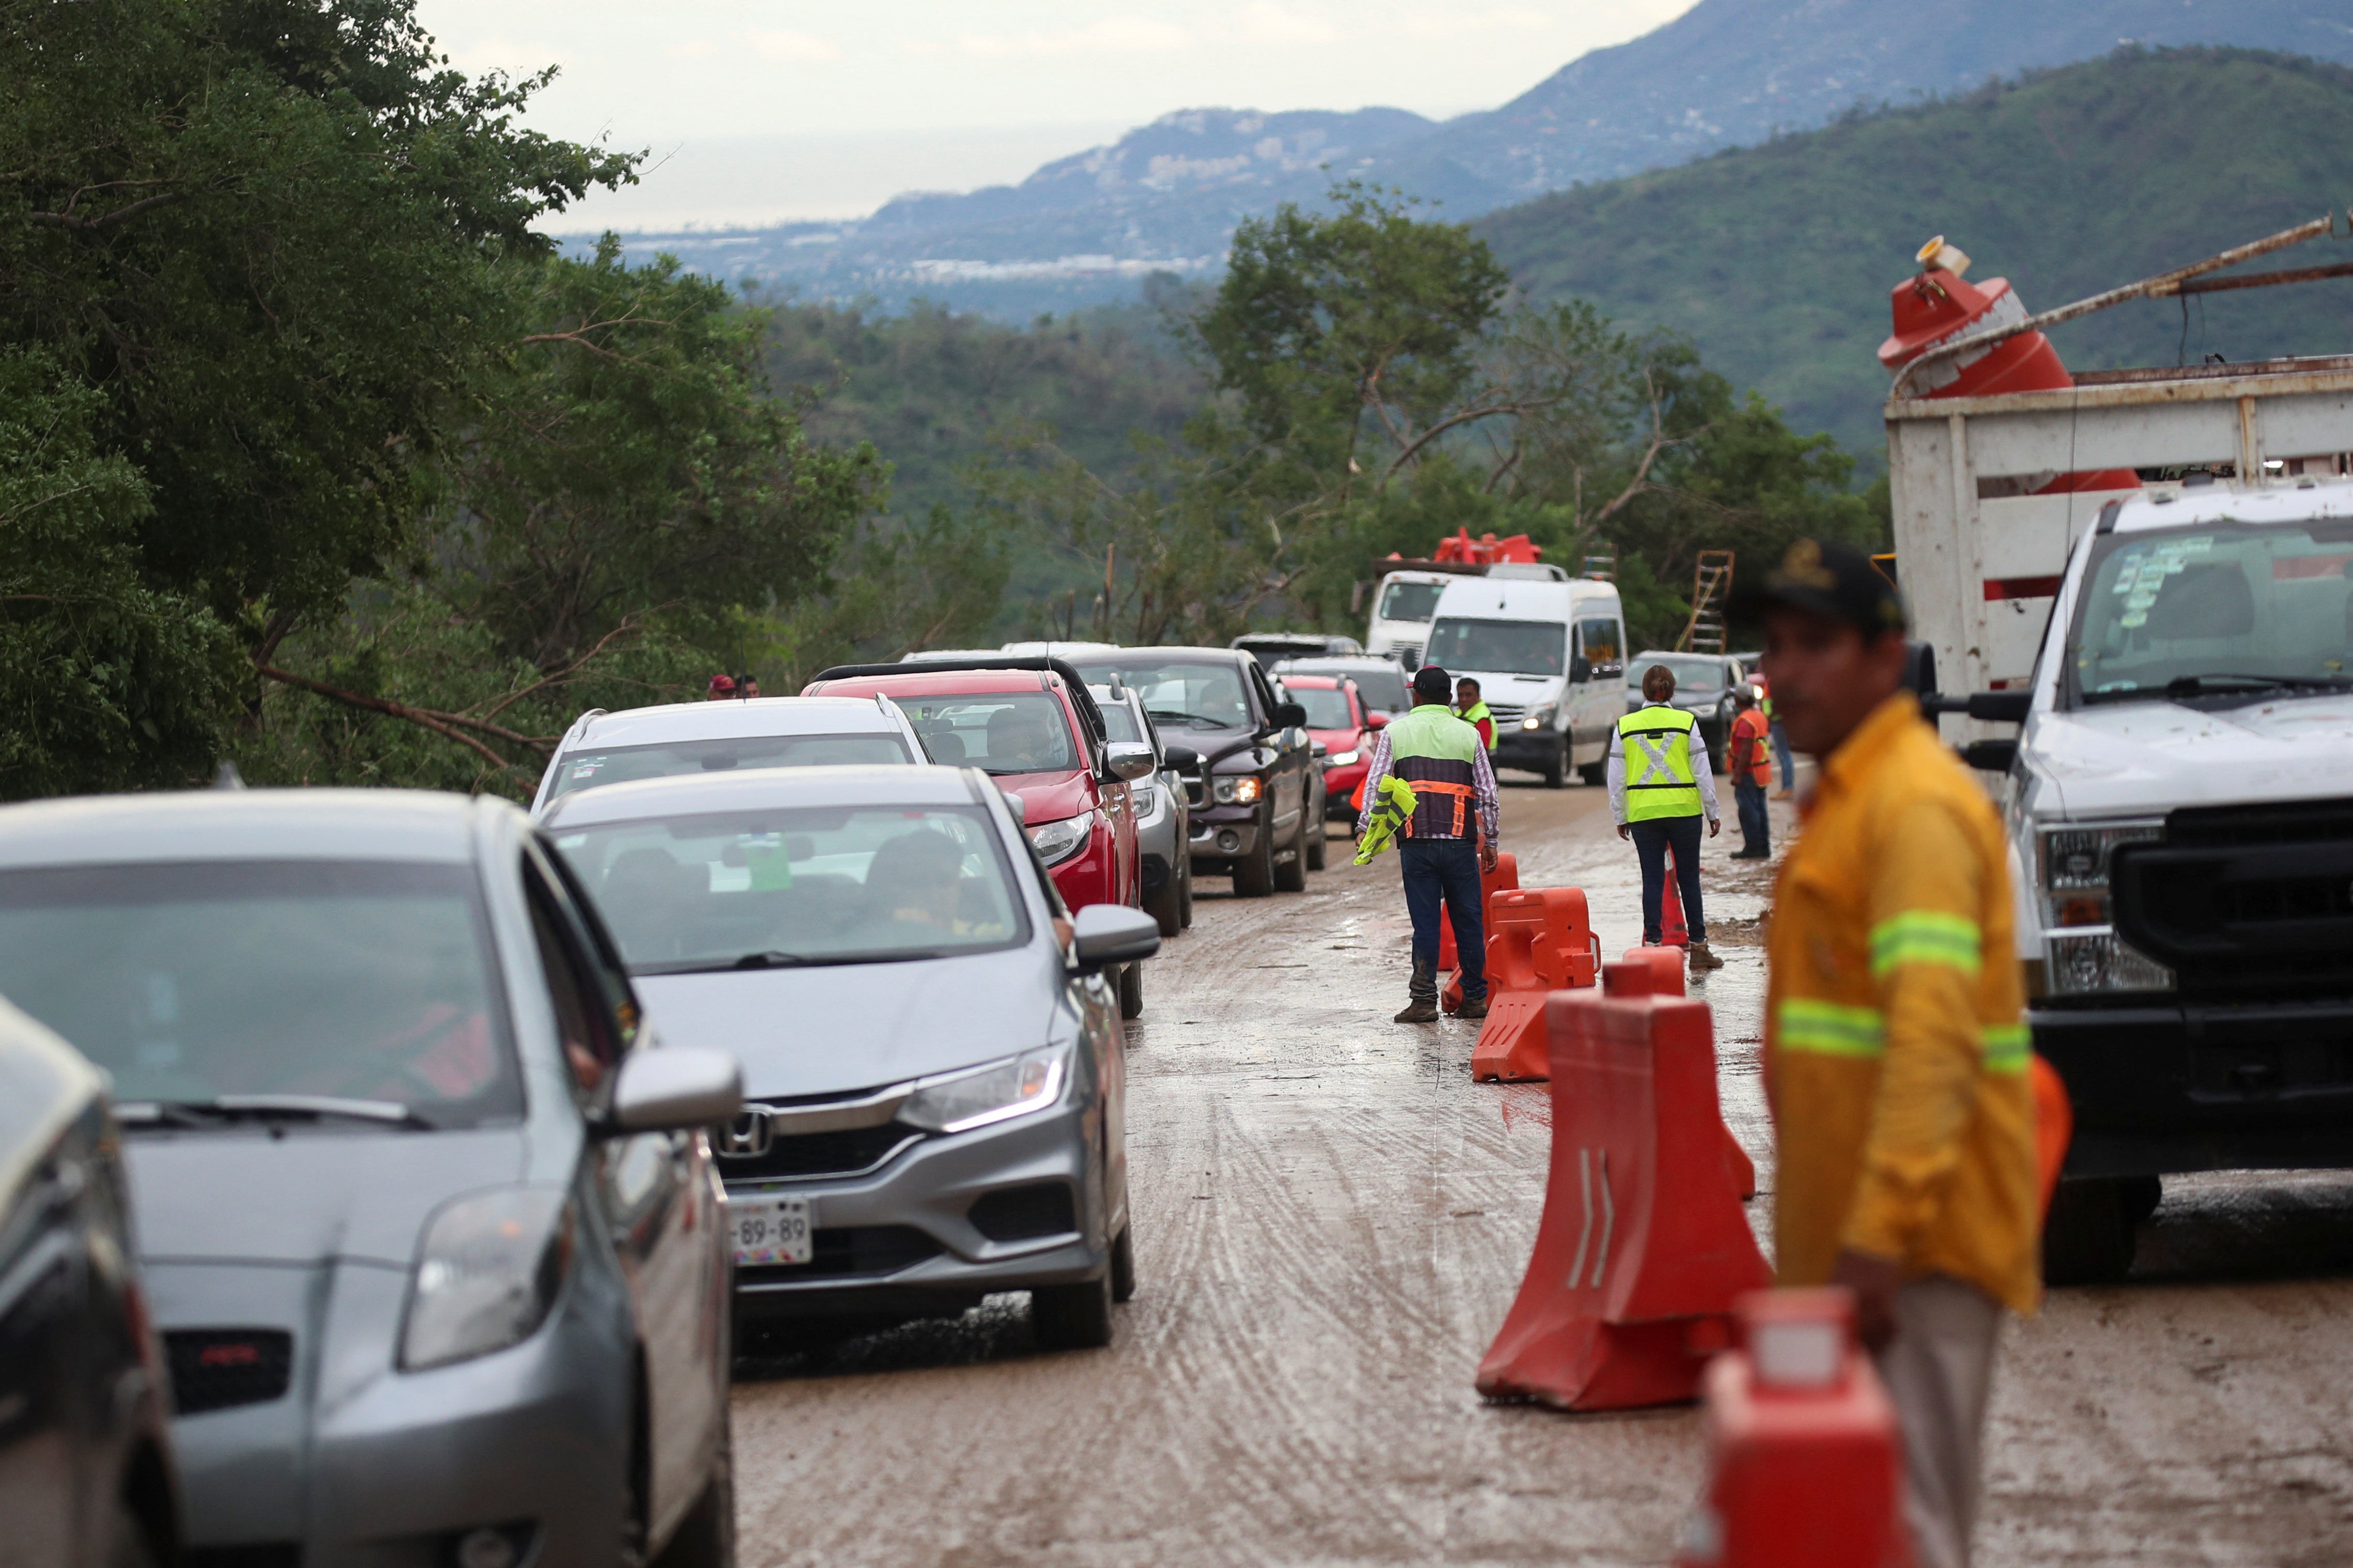 A view shows vehicles trapped by the landslide on parts of the route to Acapulco after Hurricane Otis hit, in the Mexican state of Guerrero